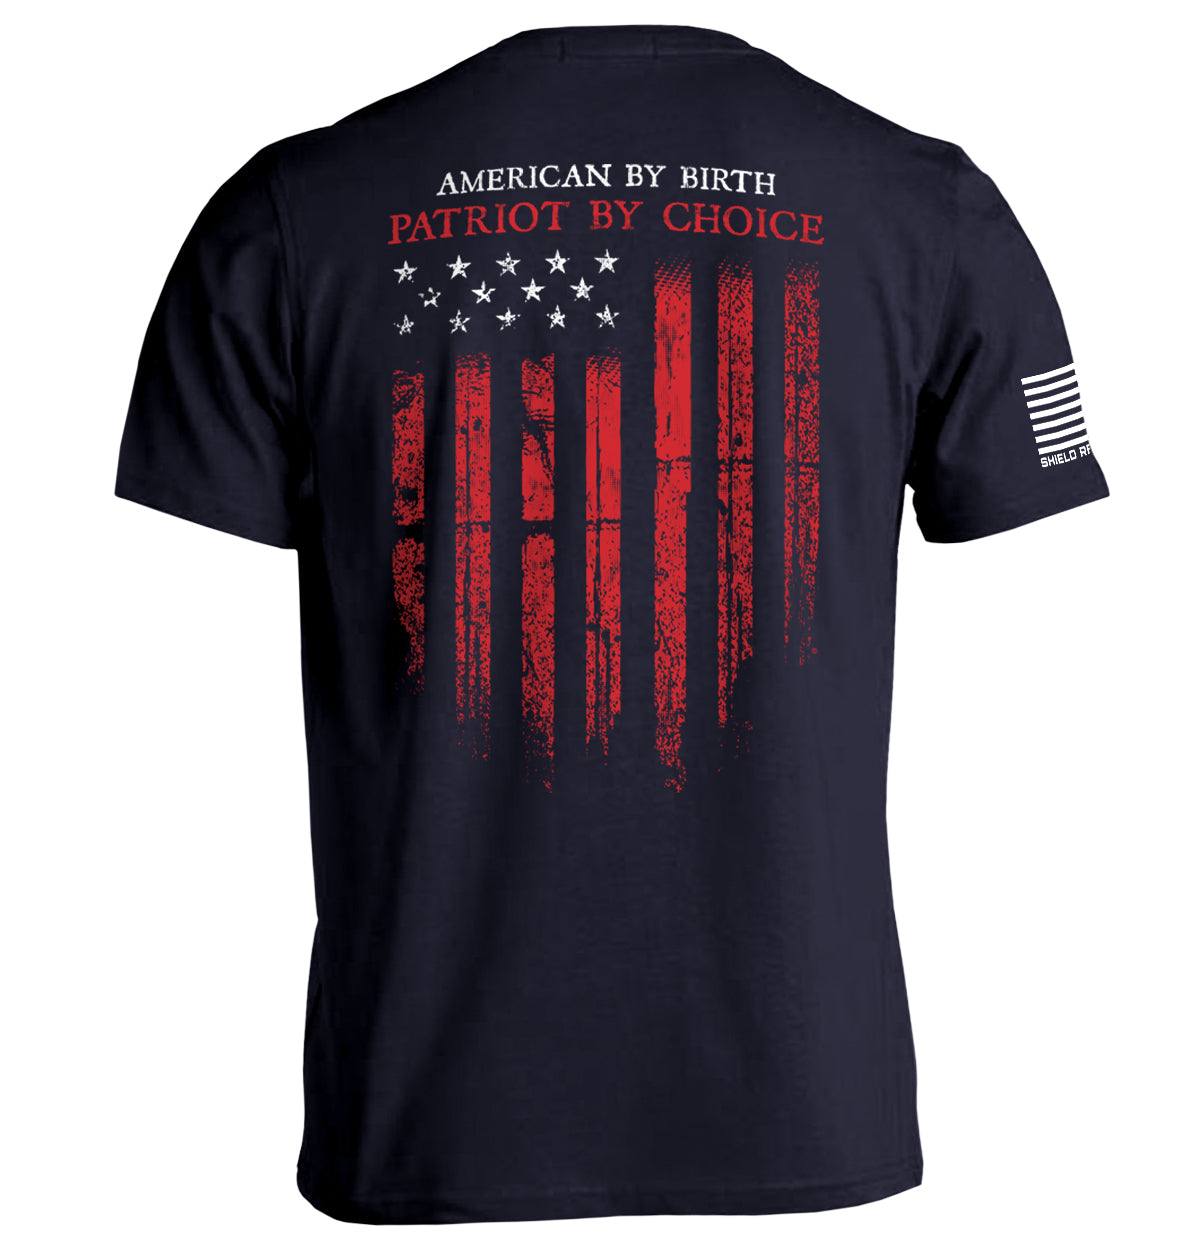 American by Birth Patriot by Choice